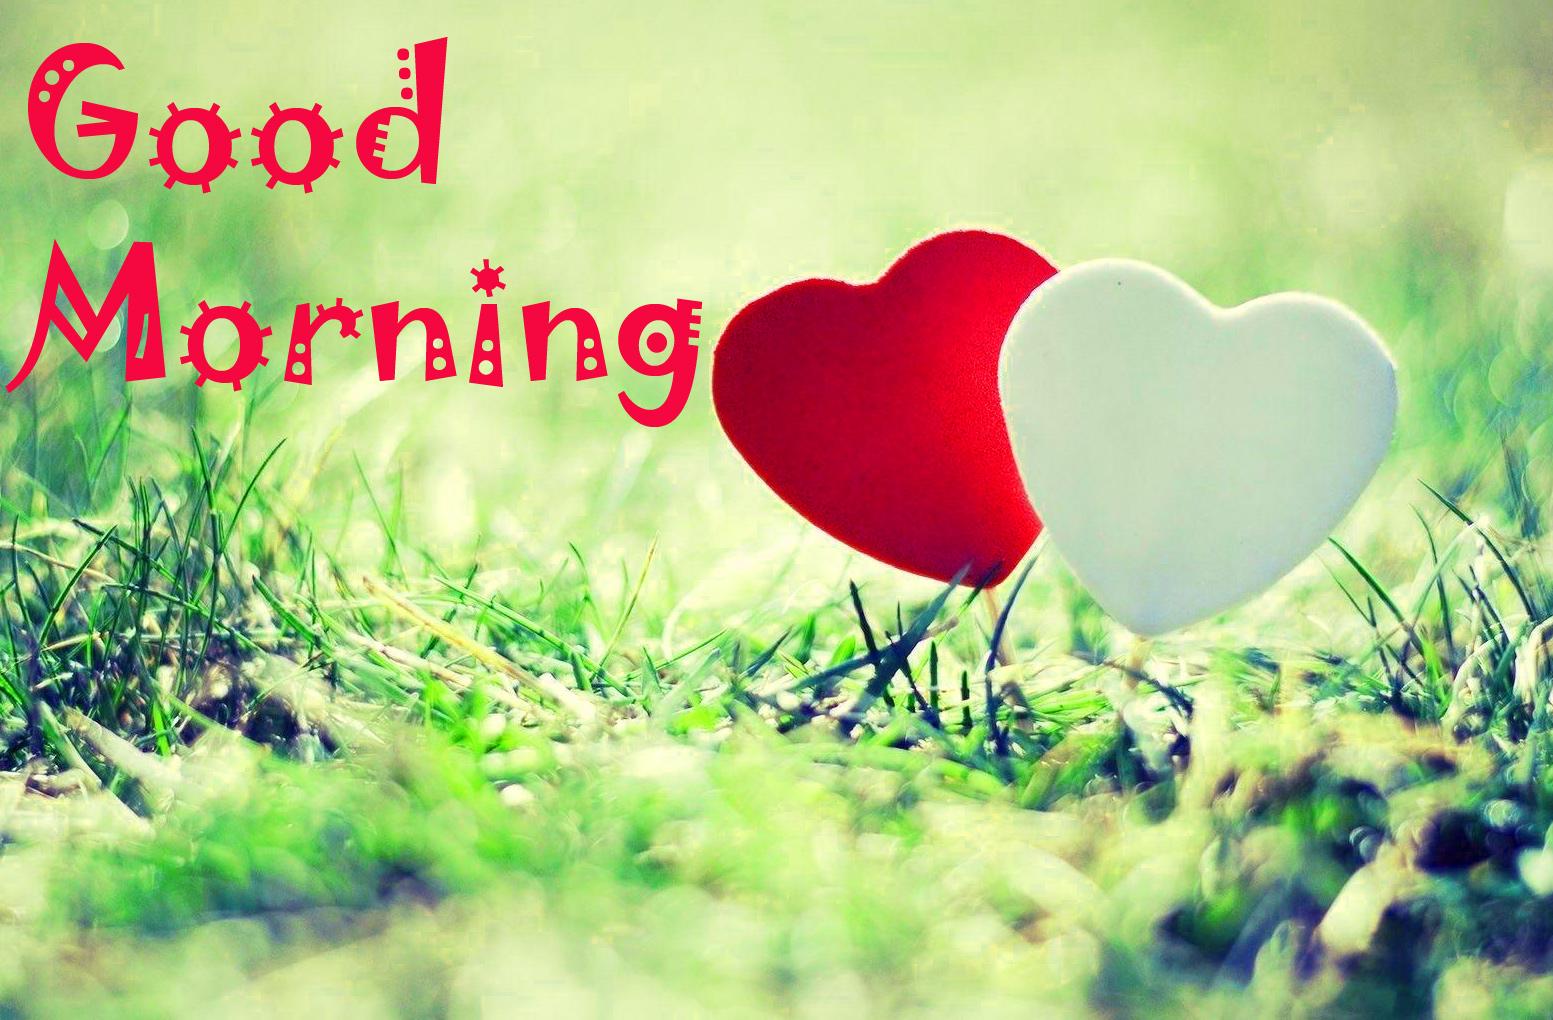 Latest Good Morning Image Wallpapers Photo Pics HD Download For